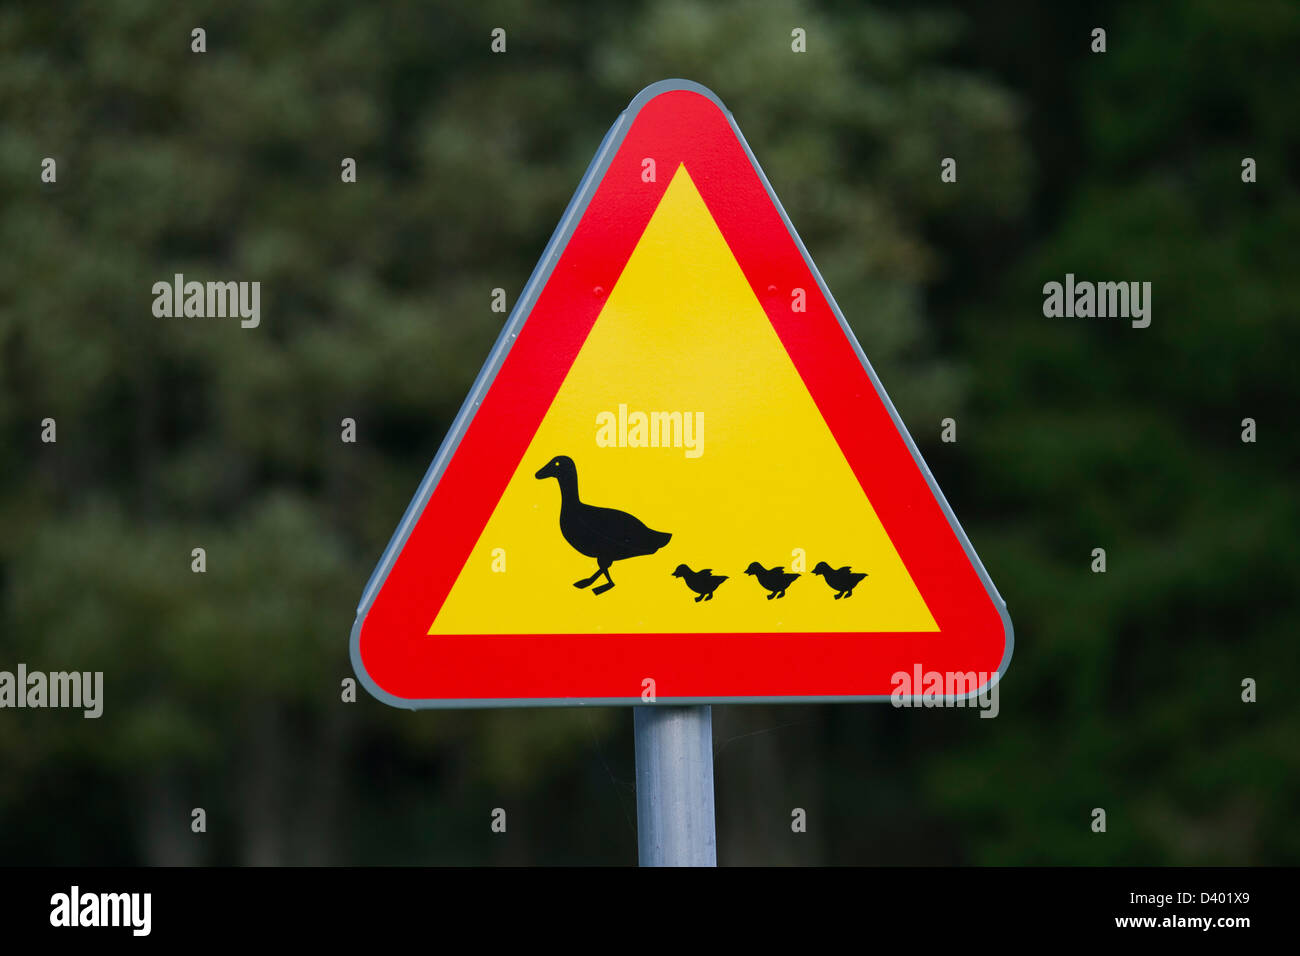 Warning sign for waterfowl and ducks crossing the road Stock Photo